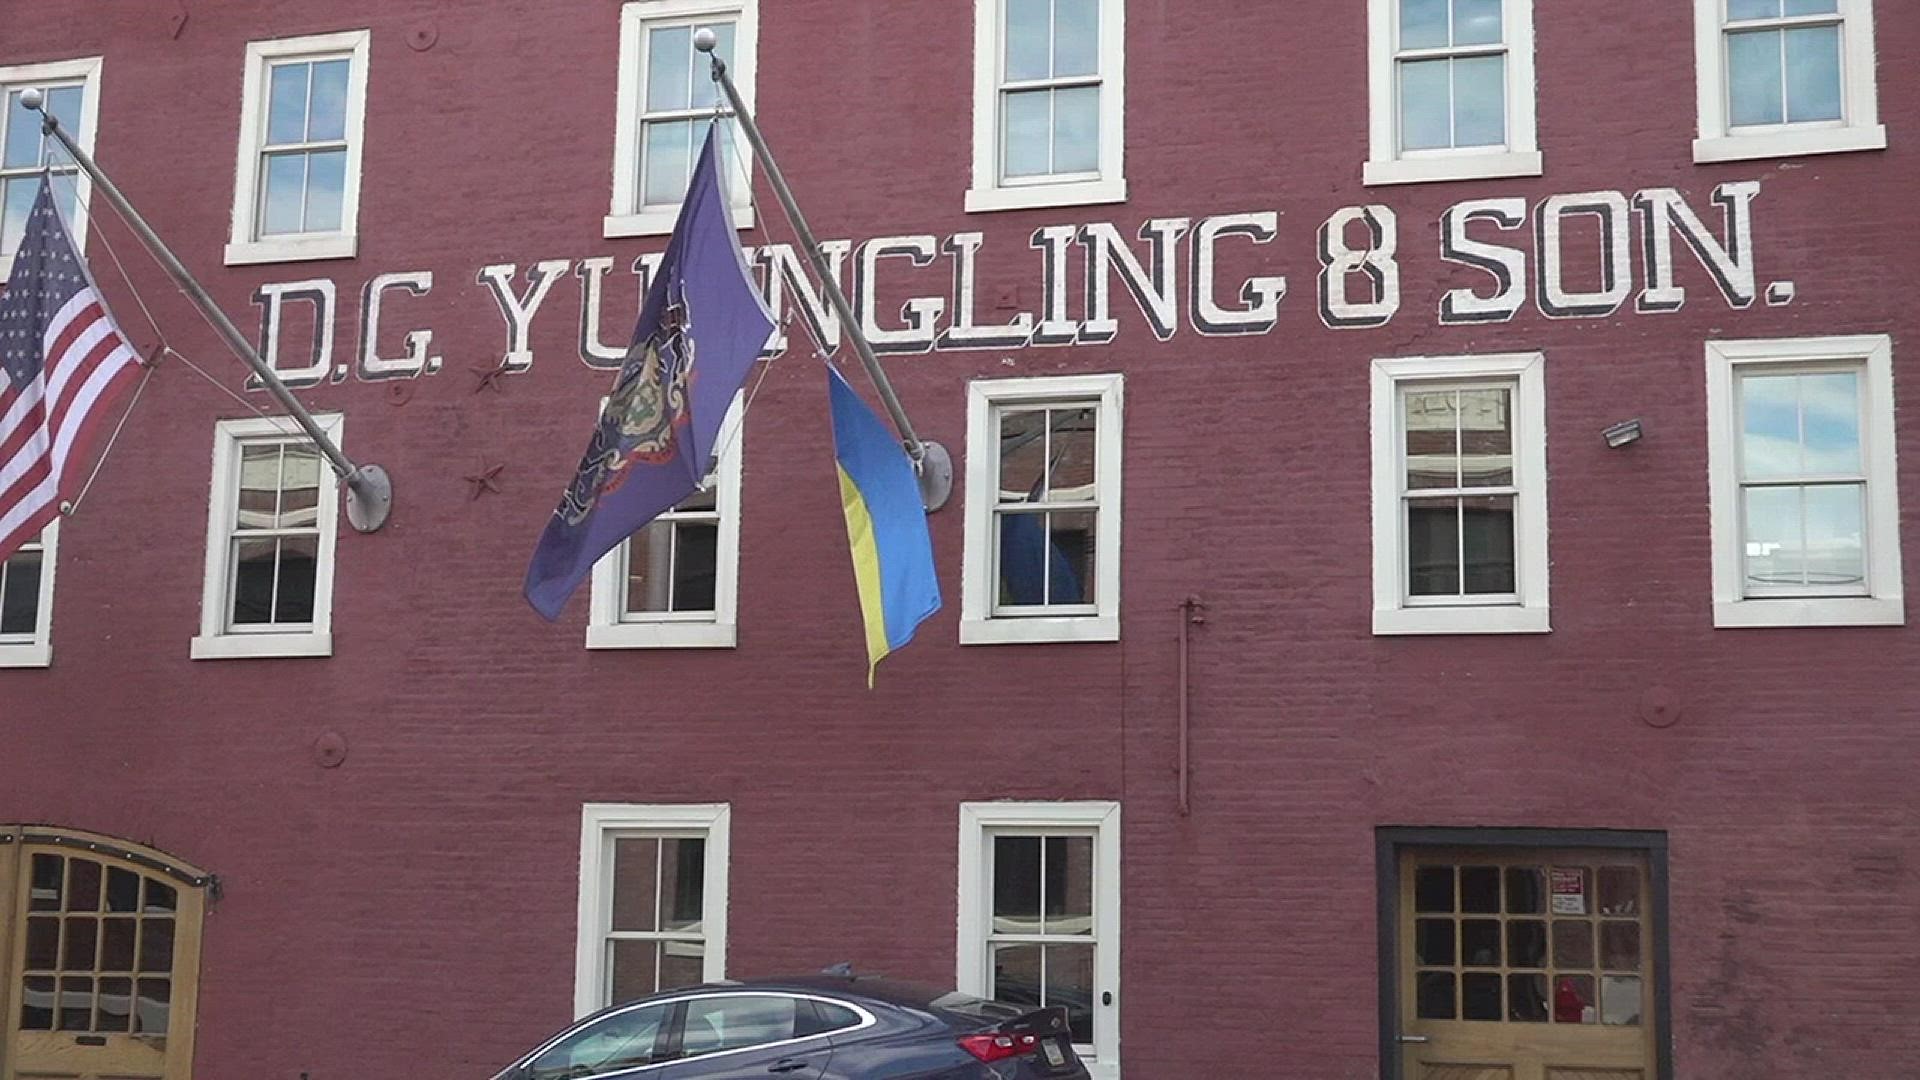 Beer lovers are coming to Pottsville for more than just the Yuengling brewery tour. Learn how beer tourism is becoming Schuylkill County's biggest attraction.